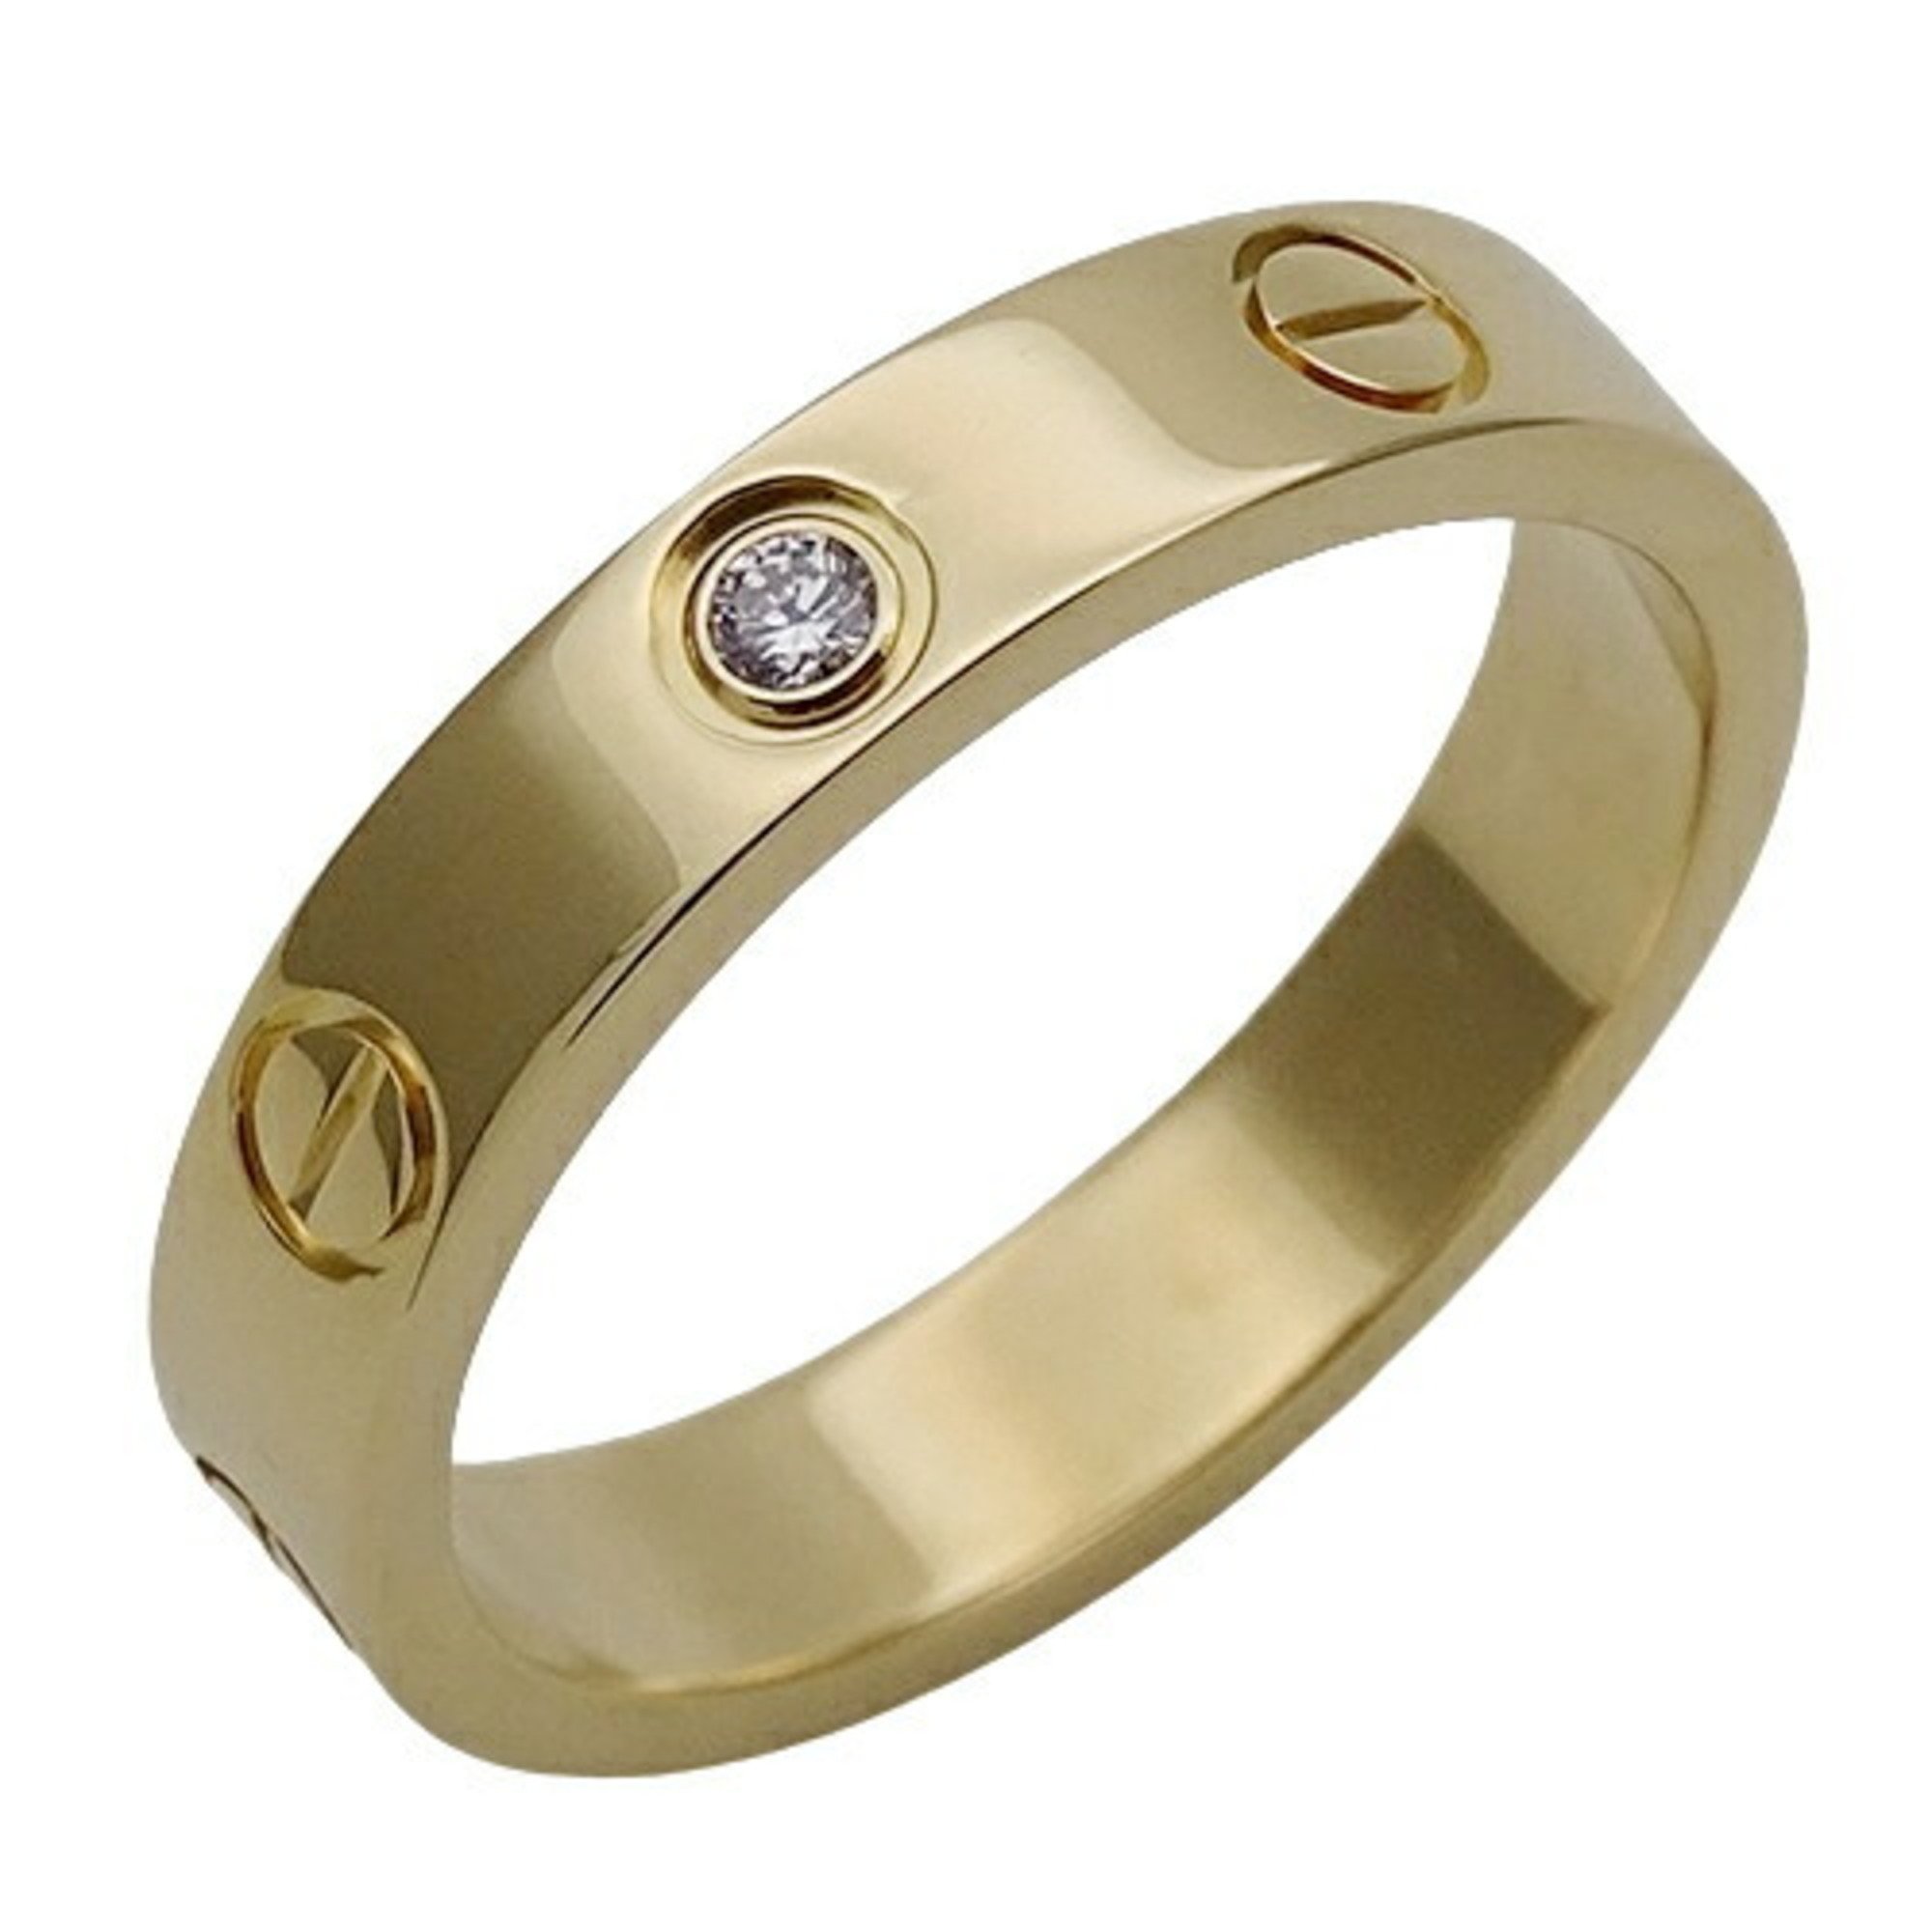 Cartier Ring for Women, 750YG, 1P Diamond, LOVE, Yellow Gold, #51, Size 11, Polished